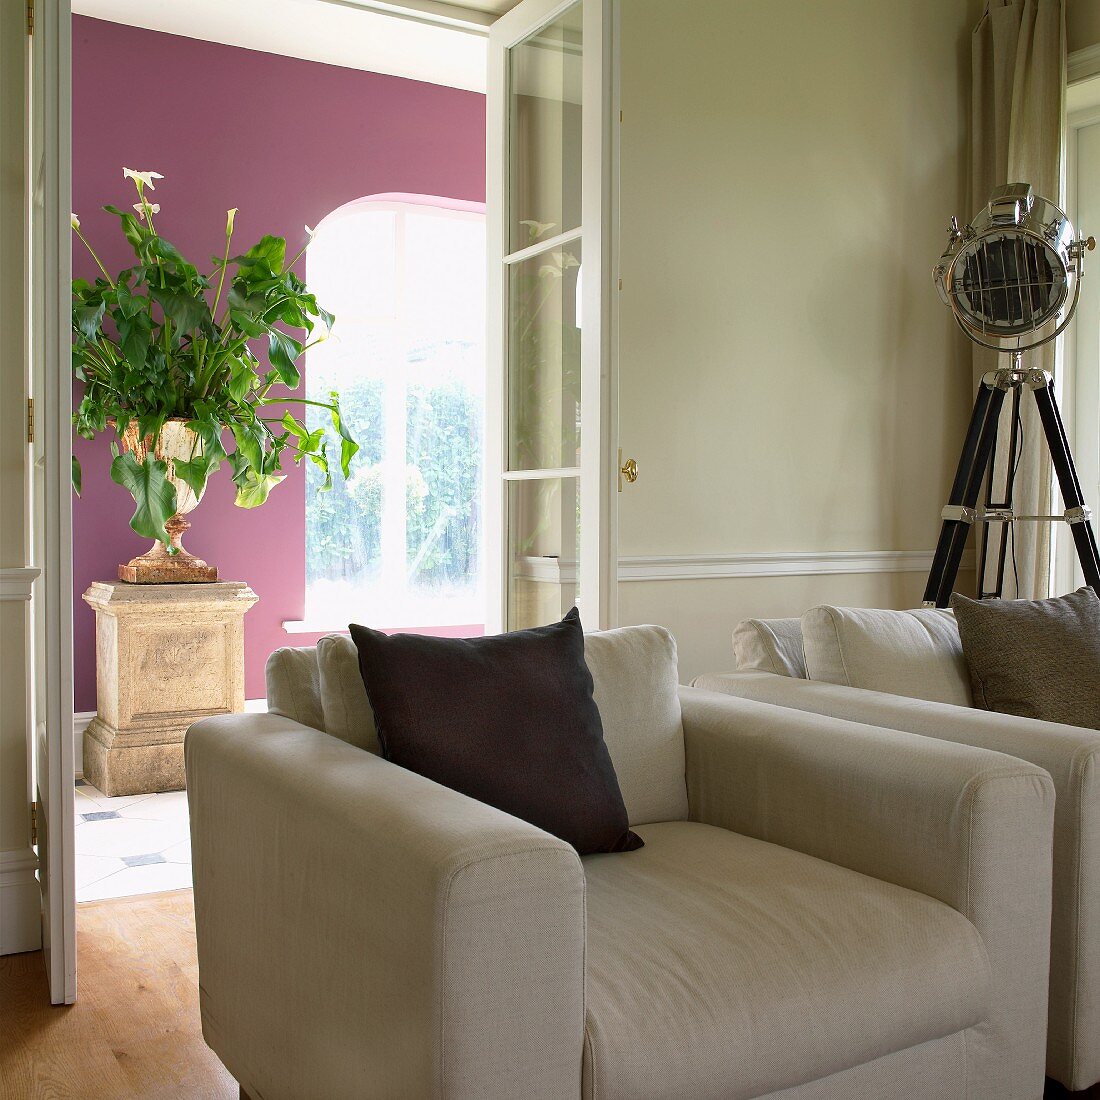 Two armchairs in interior; urn of flowers on stone pedestal against deep violet wall in background